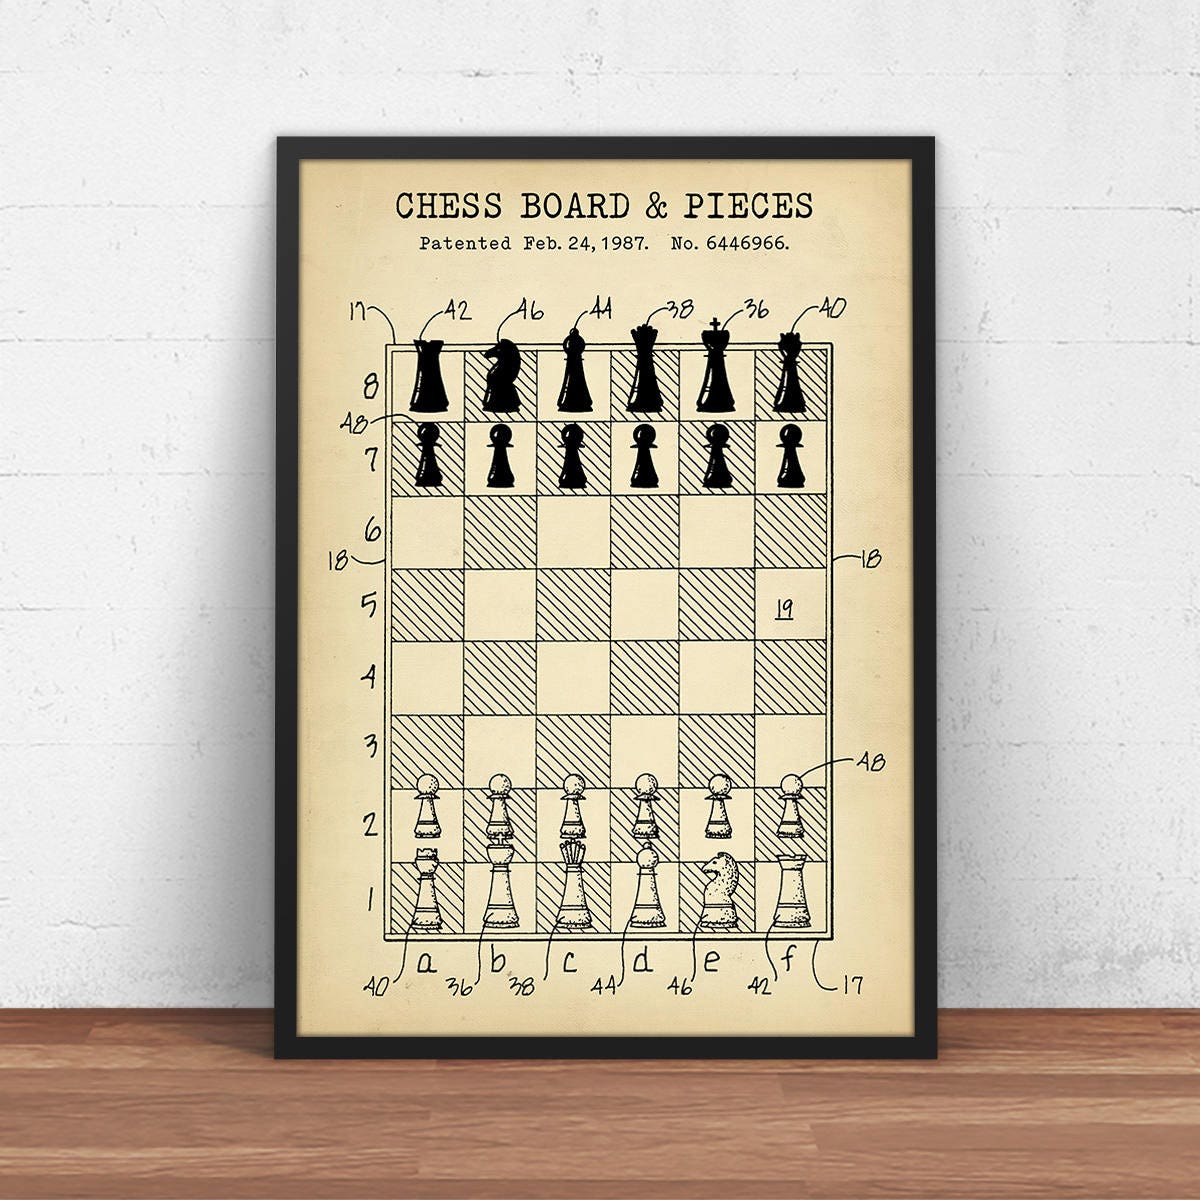 Chess Club Moves Reference Poster Set Bulletin Board Decorations